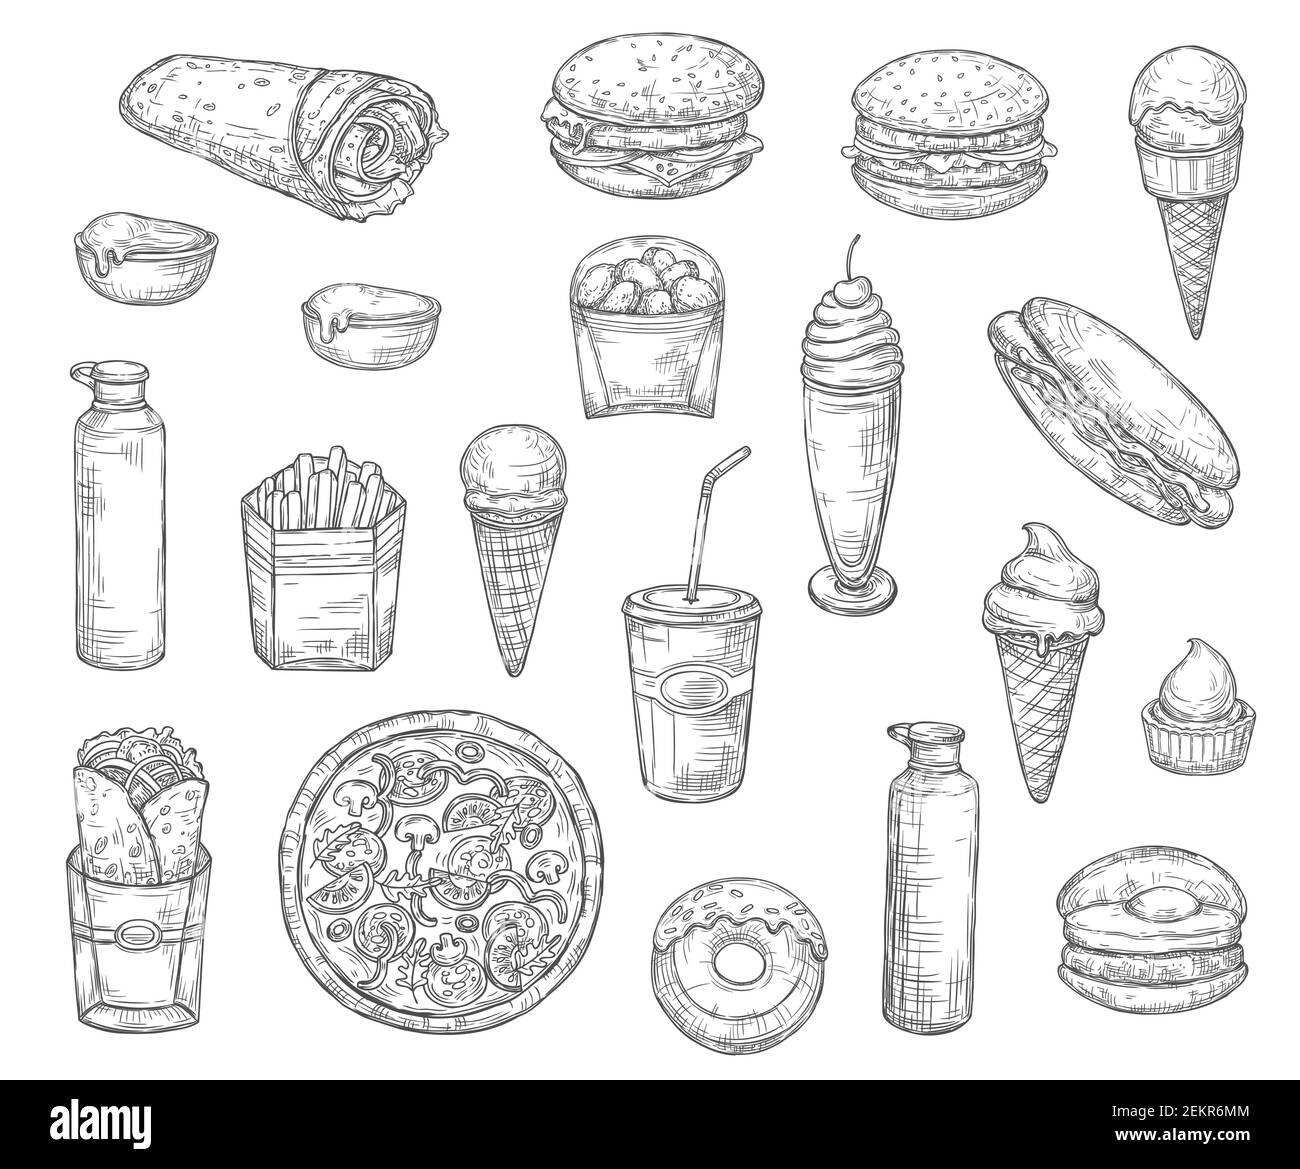 Fast food monochrome sketch icons. Vector snacks and desserts, drinks and pizza, french fries, coke or soda, hamburger or cheeseburger. Hot dog and ic Stock Vector